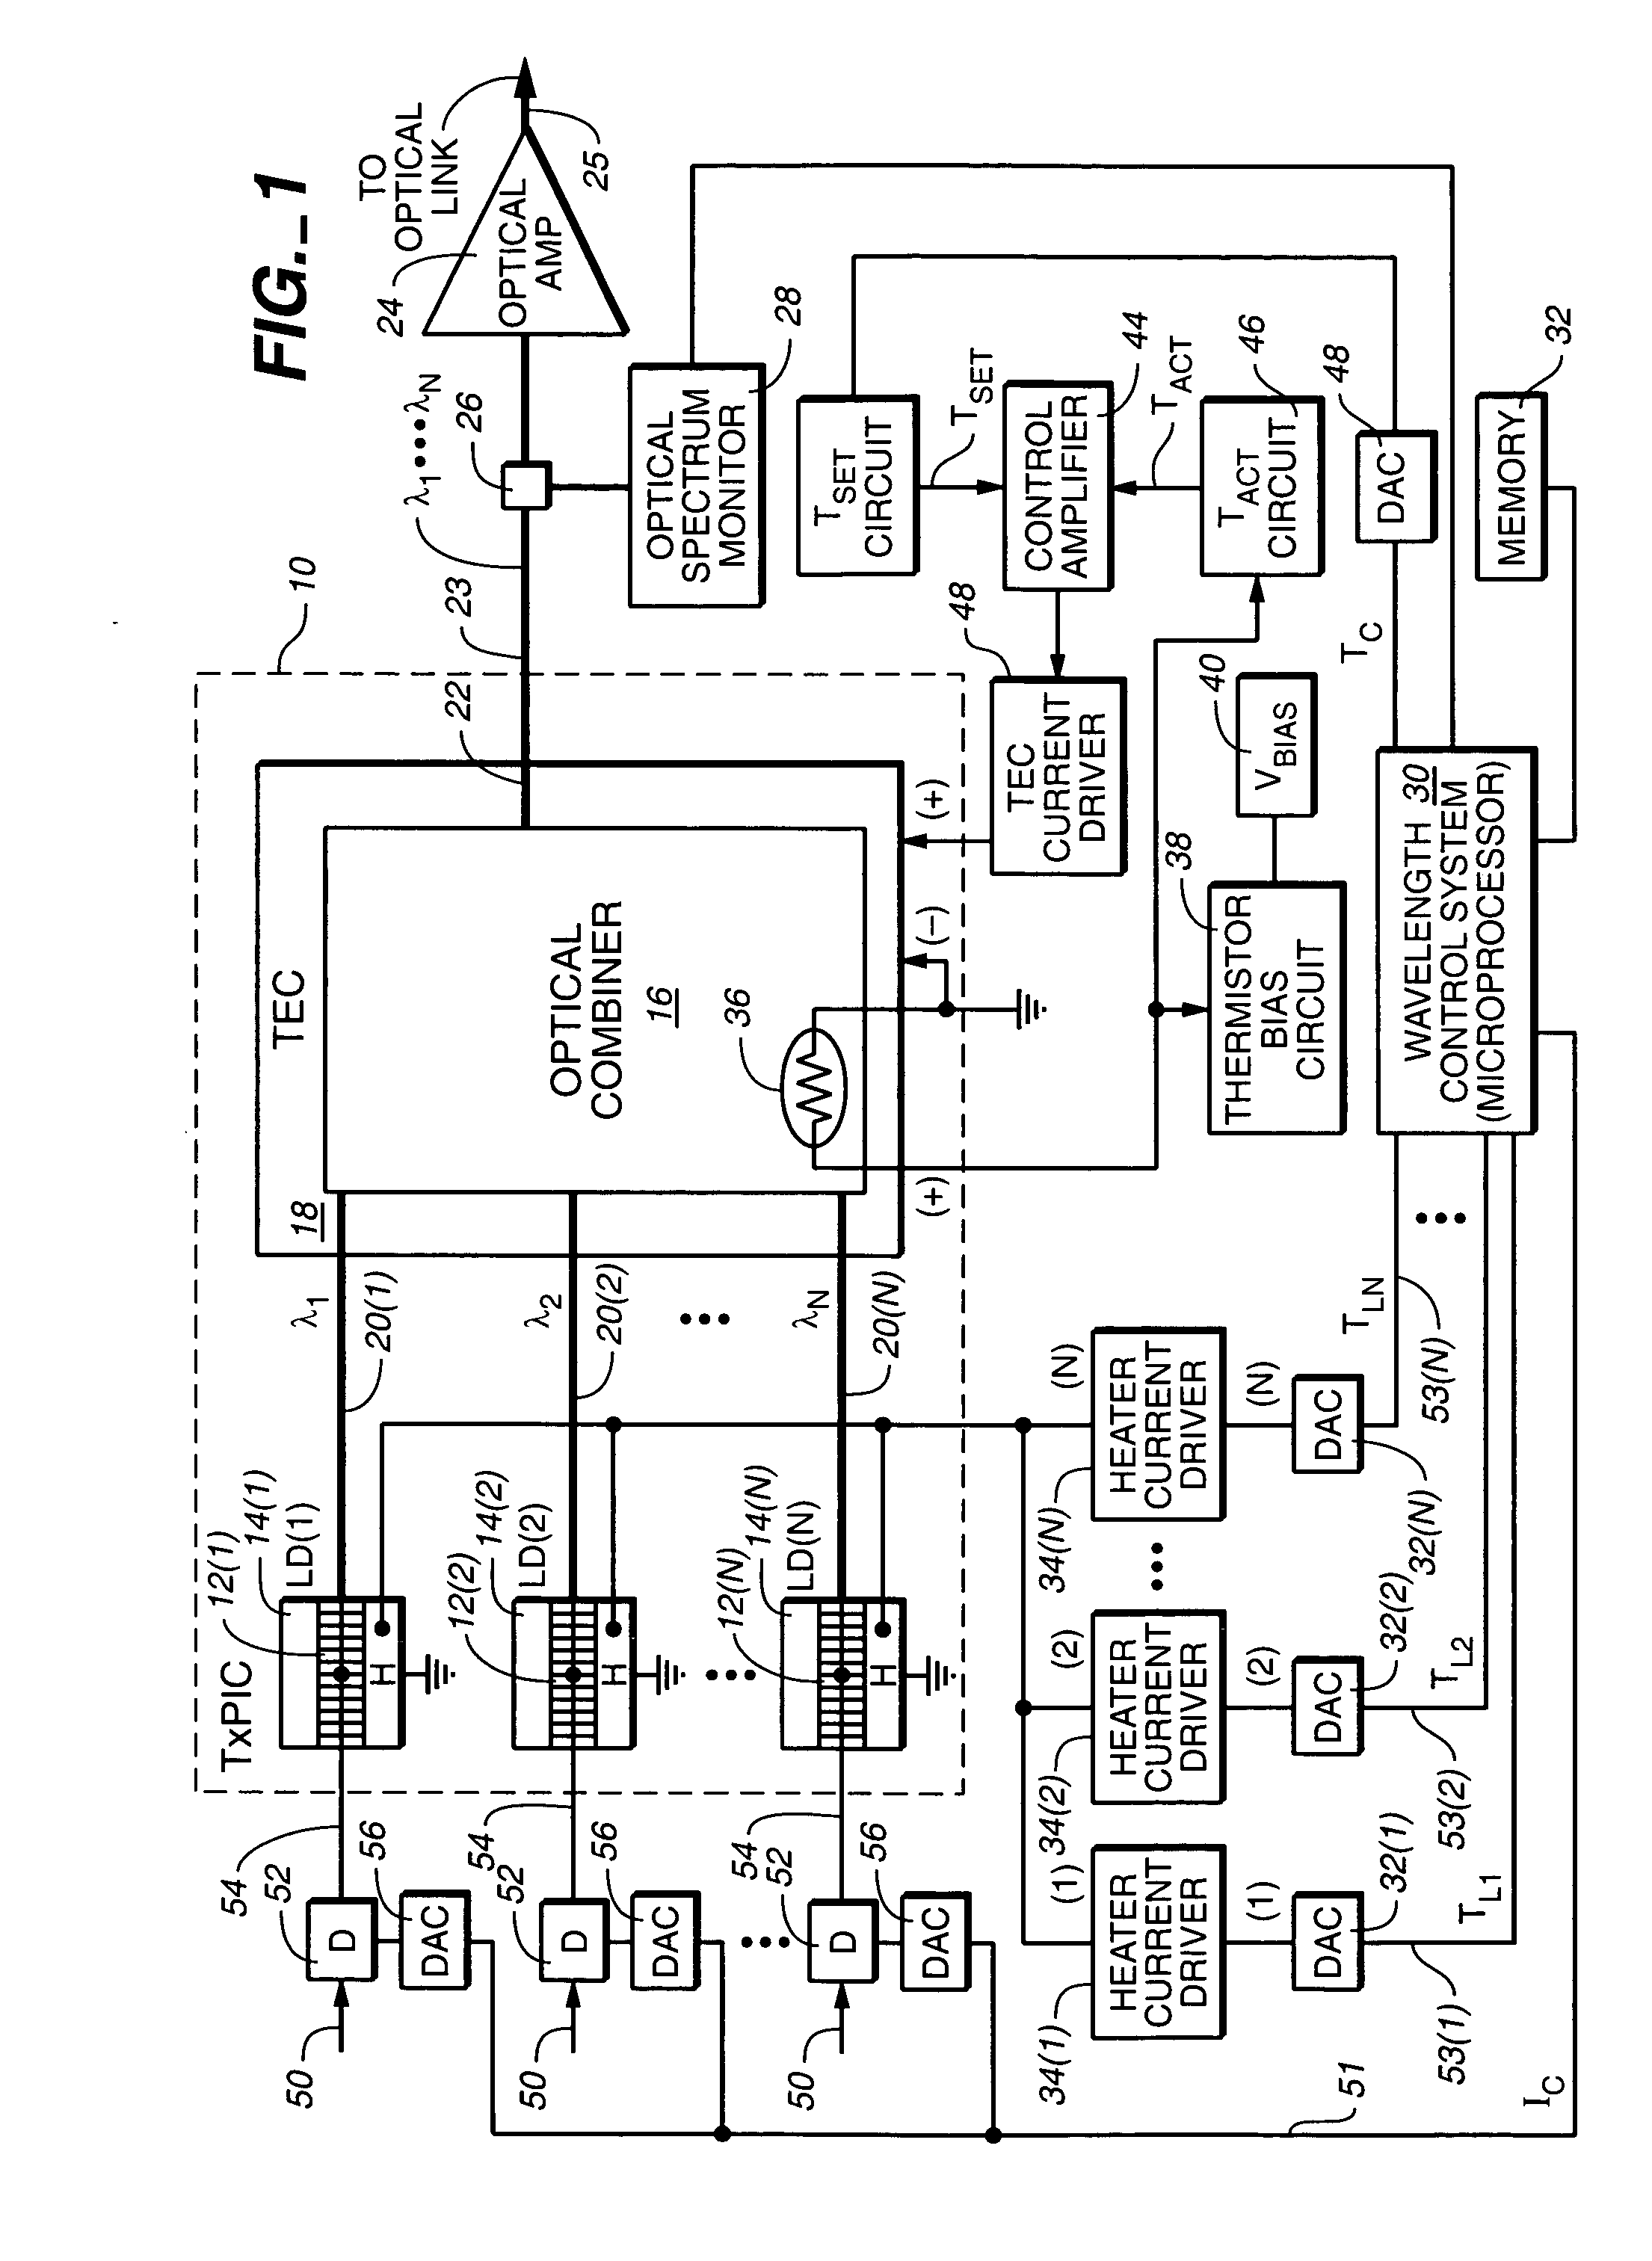 Method of tuning optical components integrated on a monolithic chip